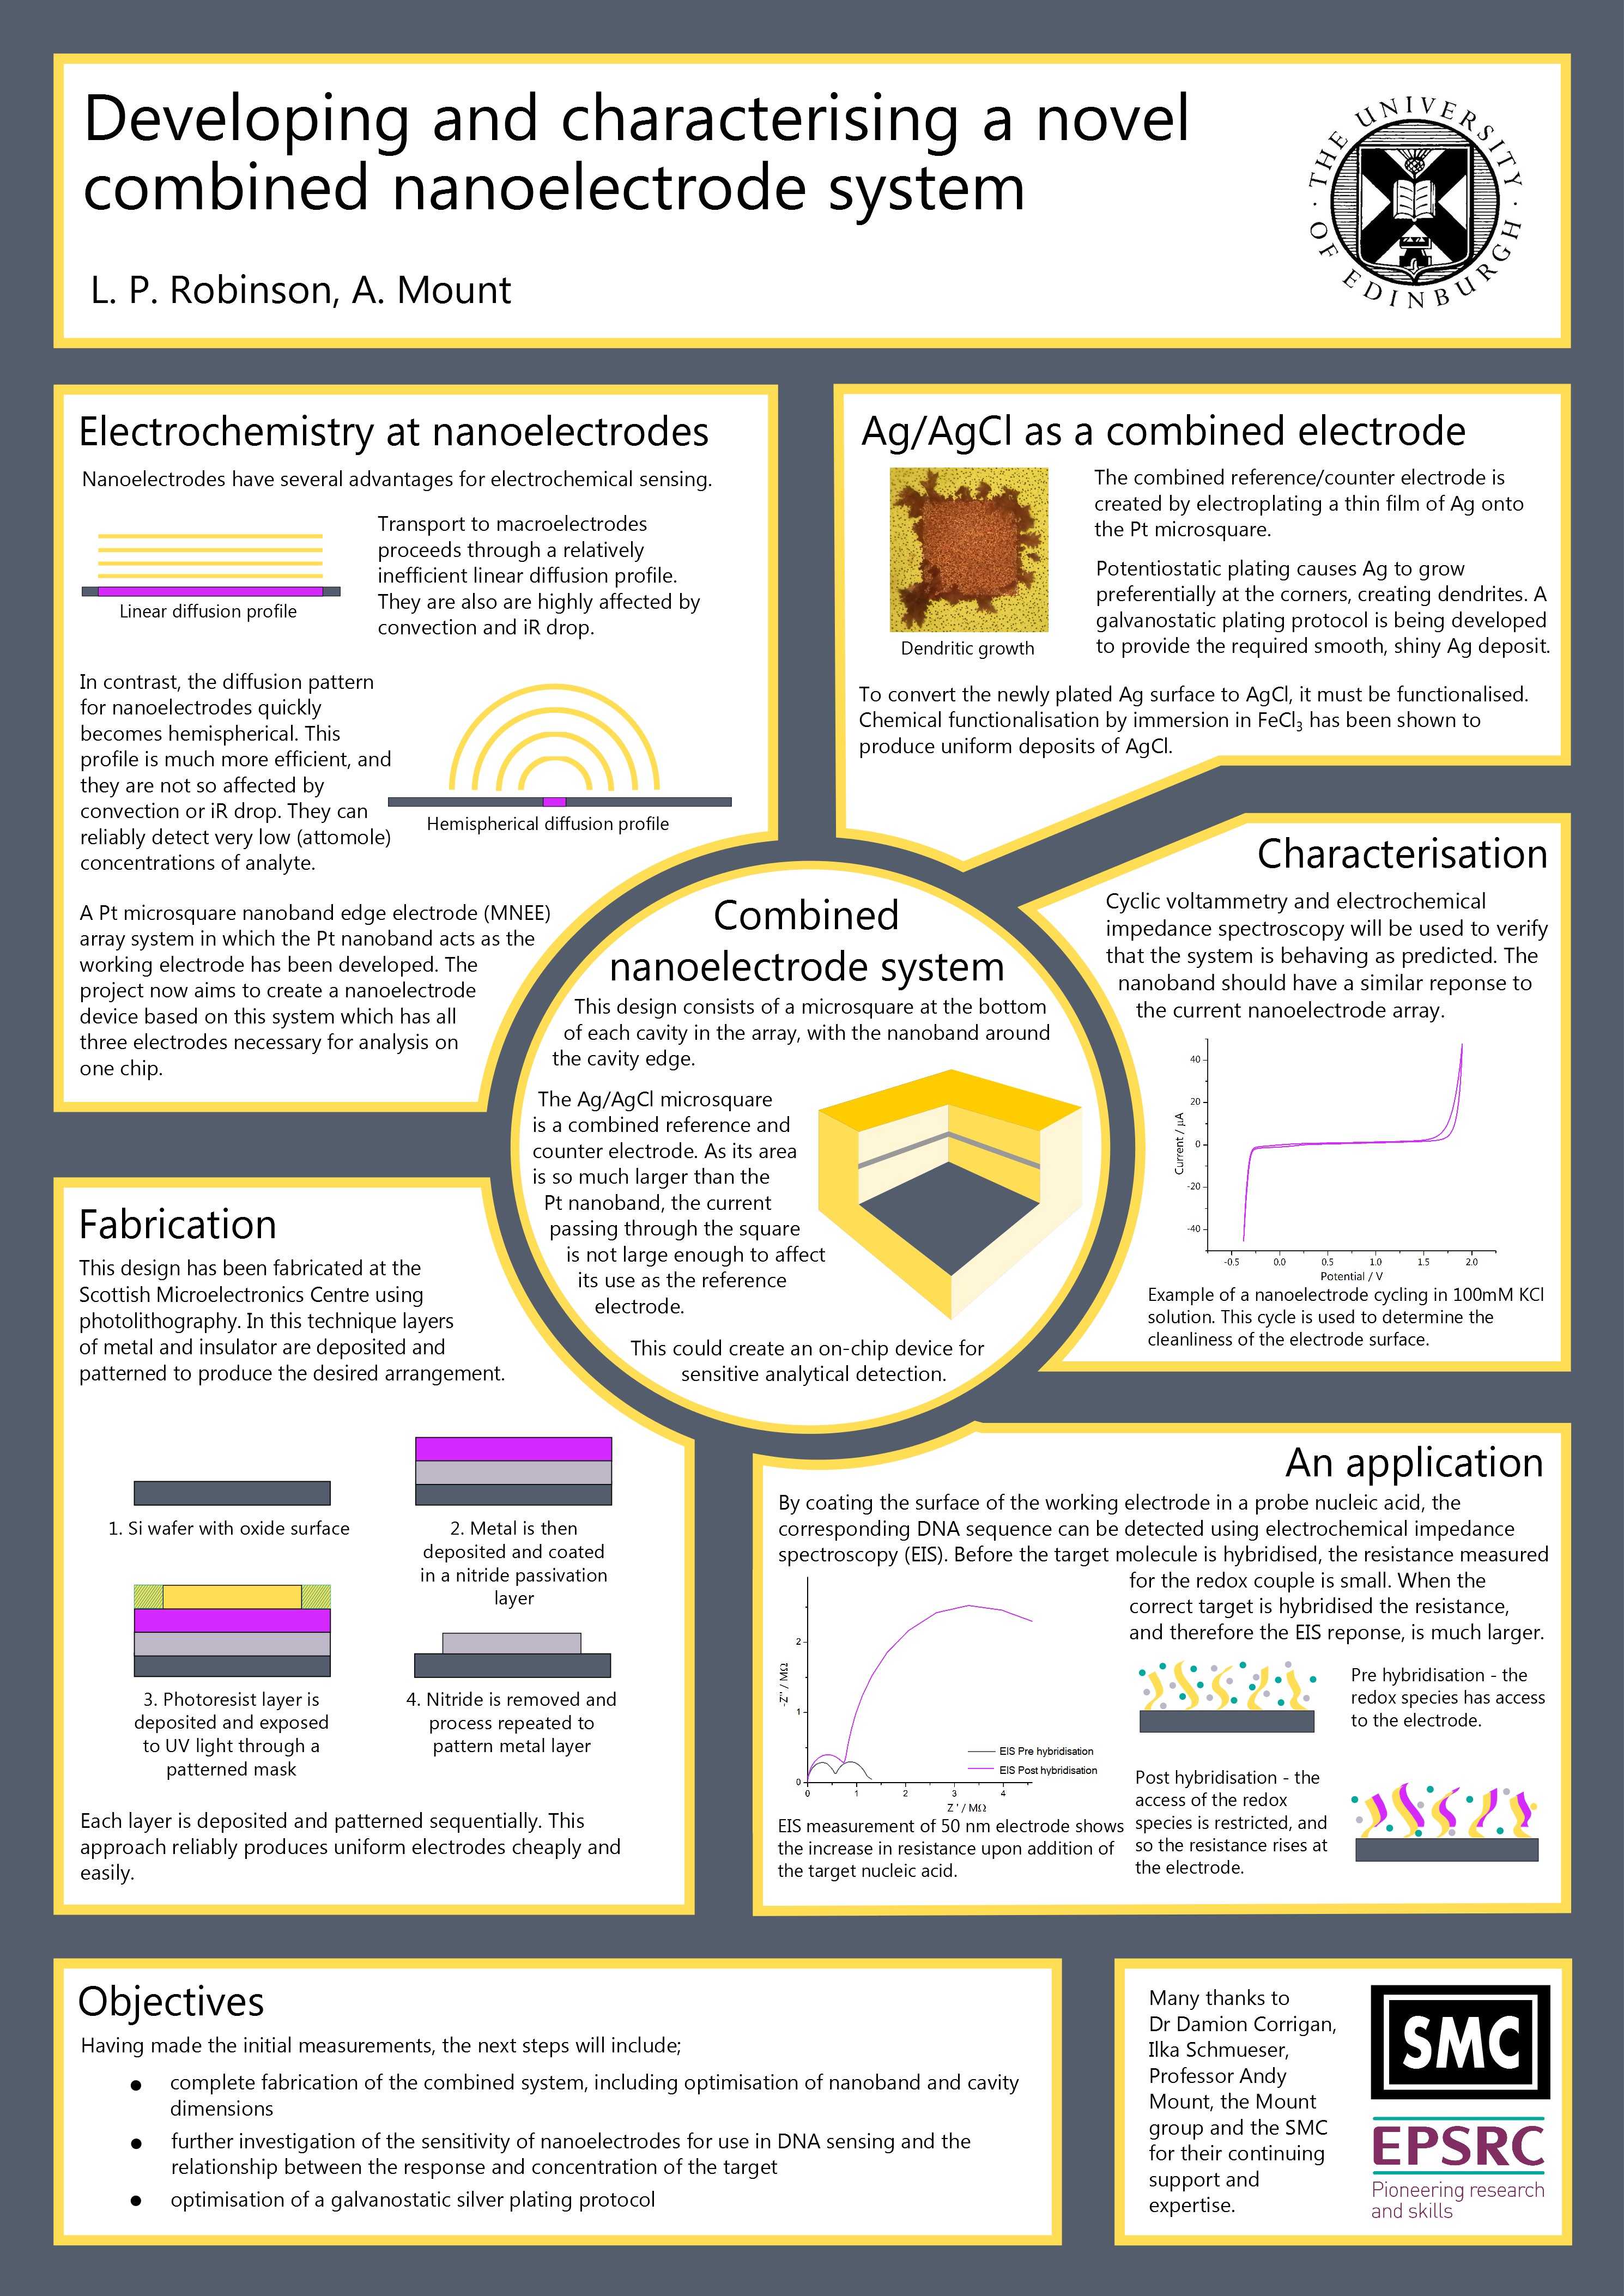 Pin By Lin On ACADEMIC POSTER Pinterest Scientific Poster Design Chemistry Template